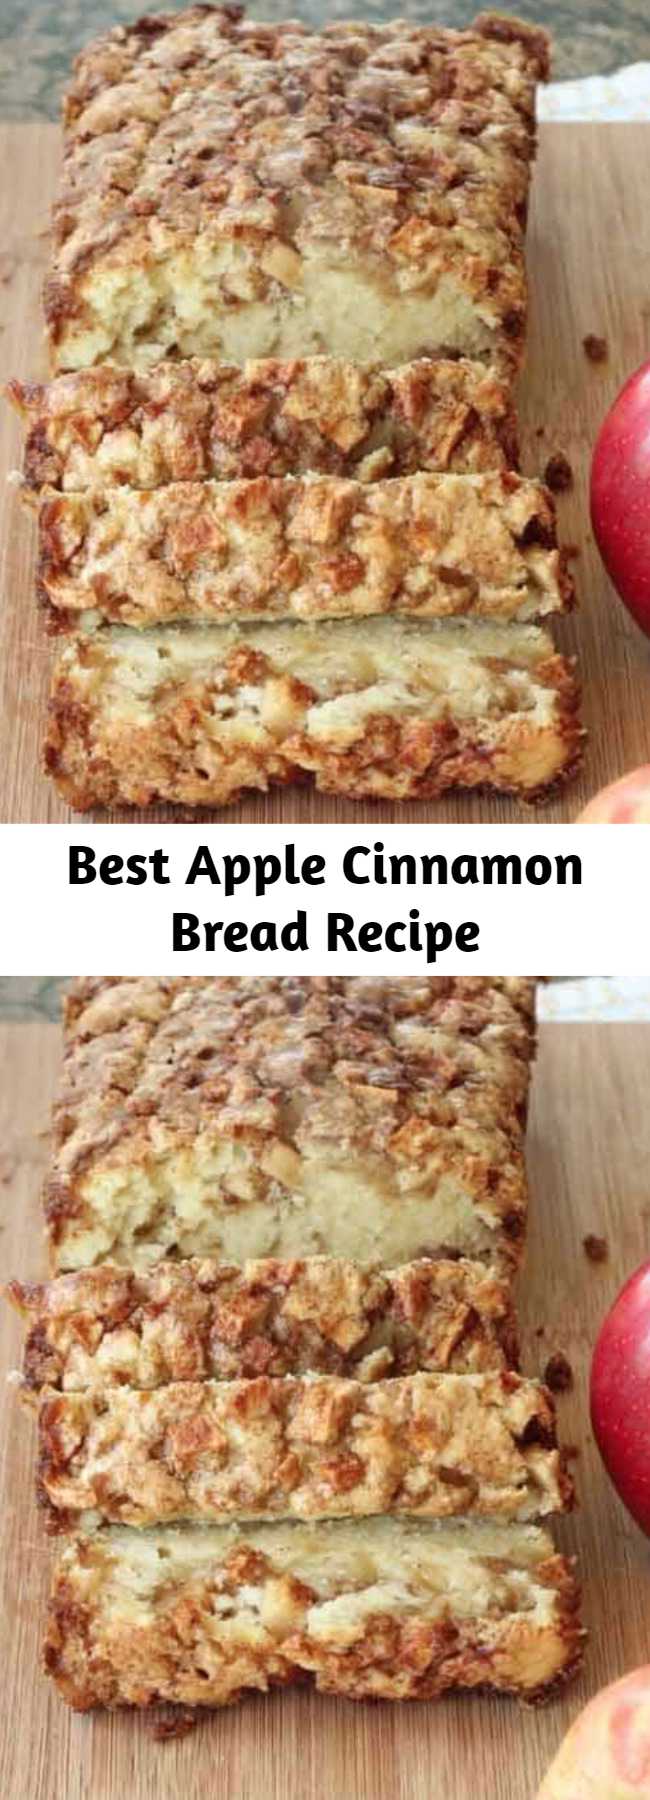 Best Apple Cinnamon Bread Recipe - This is the absolute BEST Apple Bread on the internet. Swirled with cinnamon sugar and juicy apple pieces, try this Apple Bread recipe out and see why it has over 250 amazing reviews!